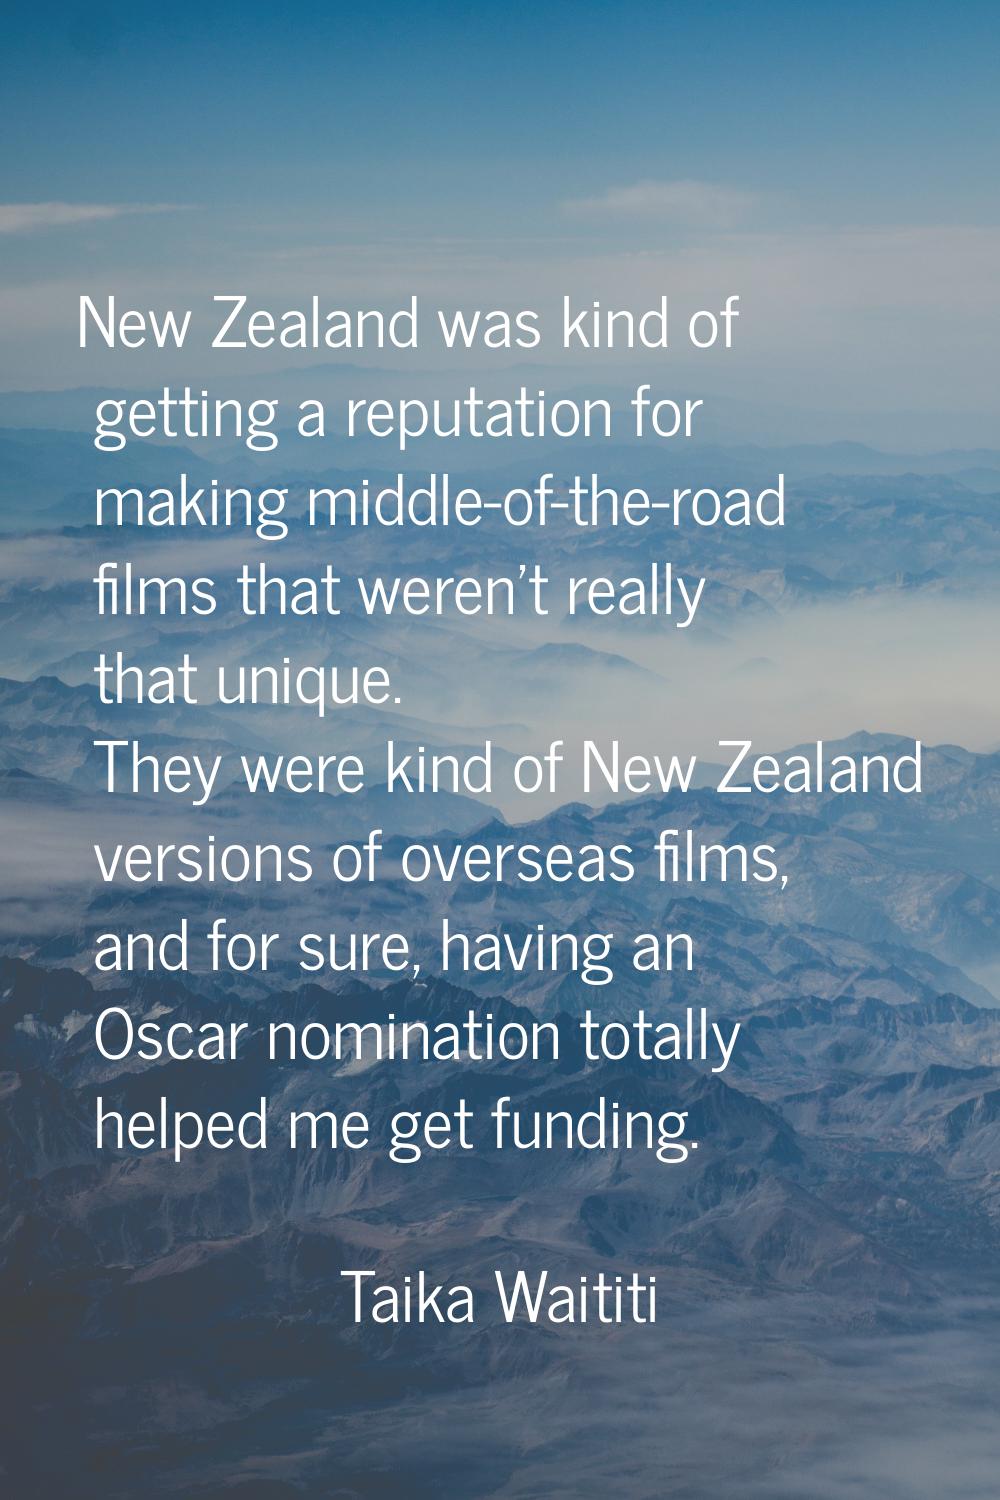 New Zealand was kind of getting a reputation for making middle-of-the-road films that weren't reall